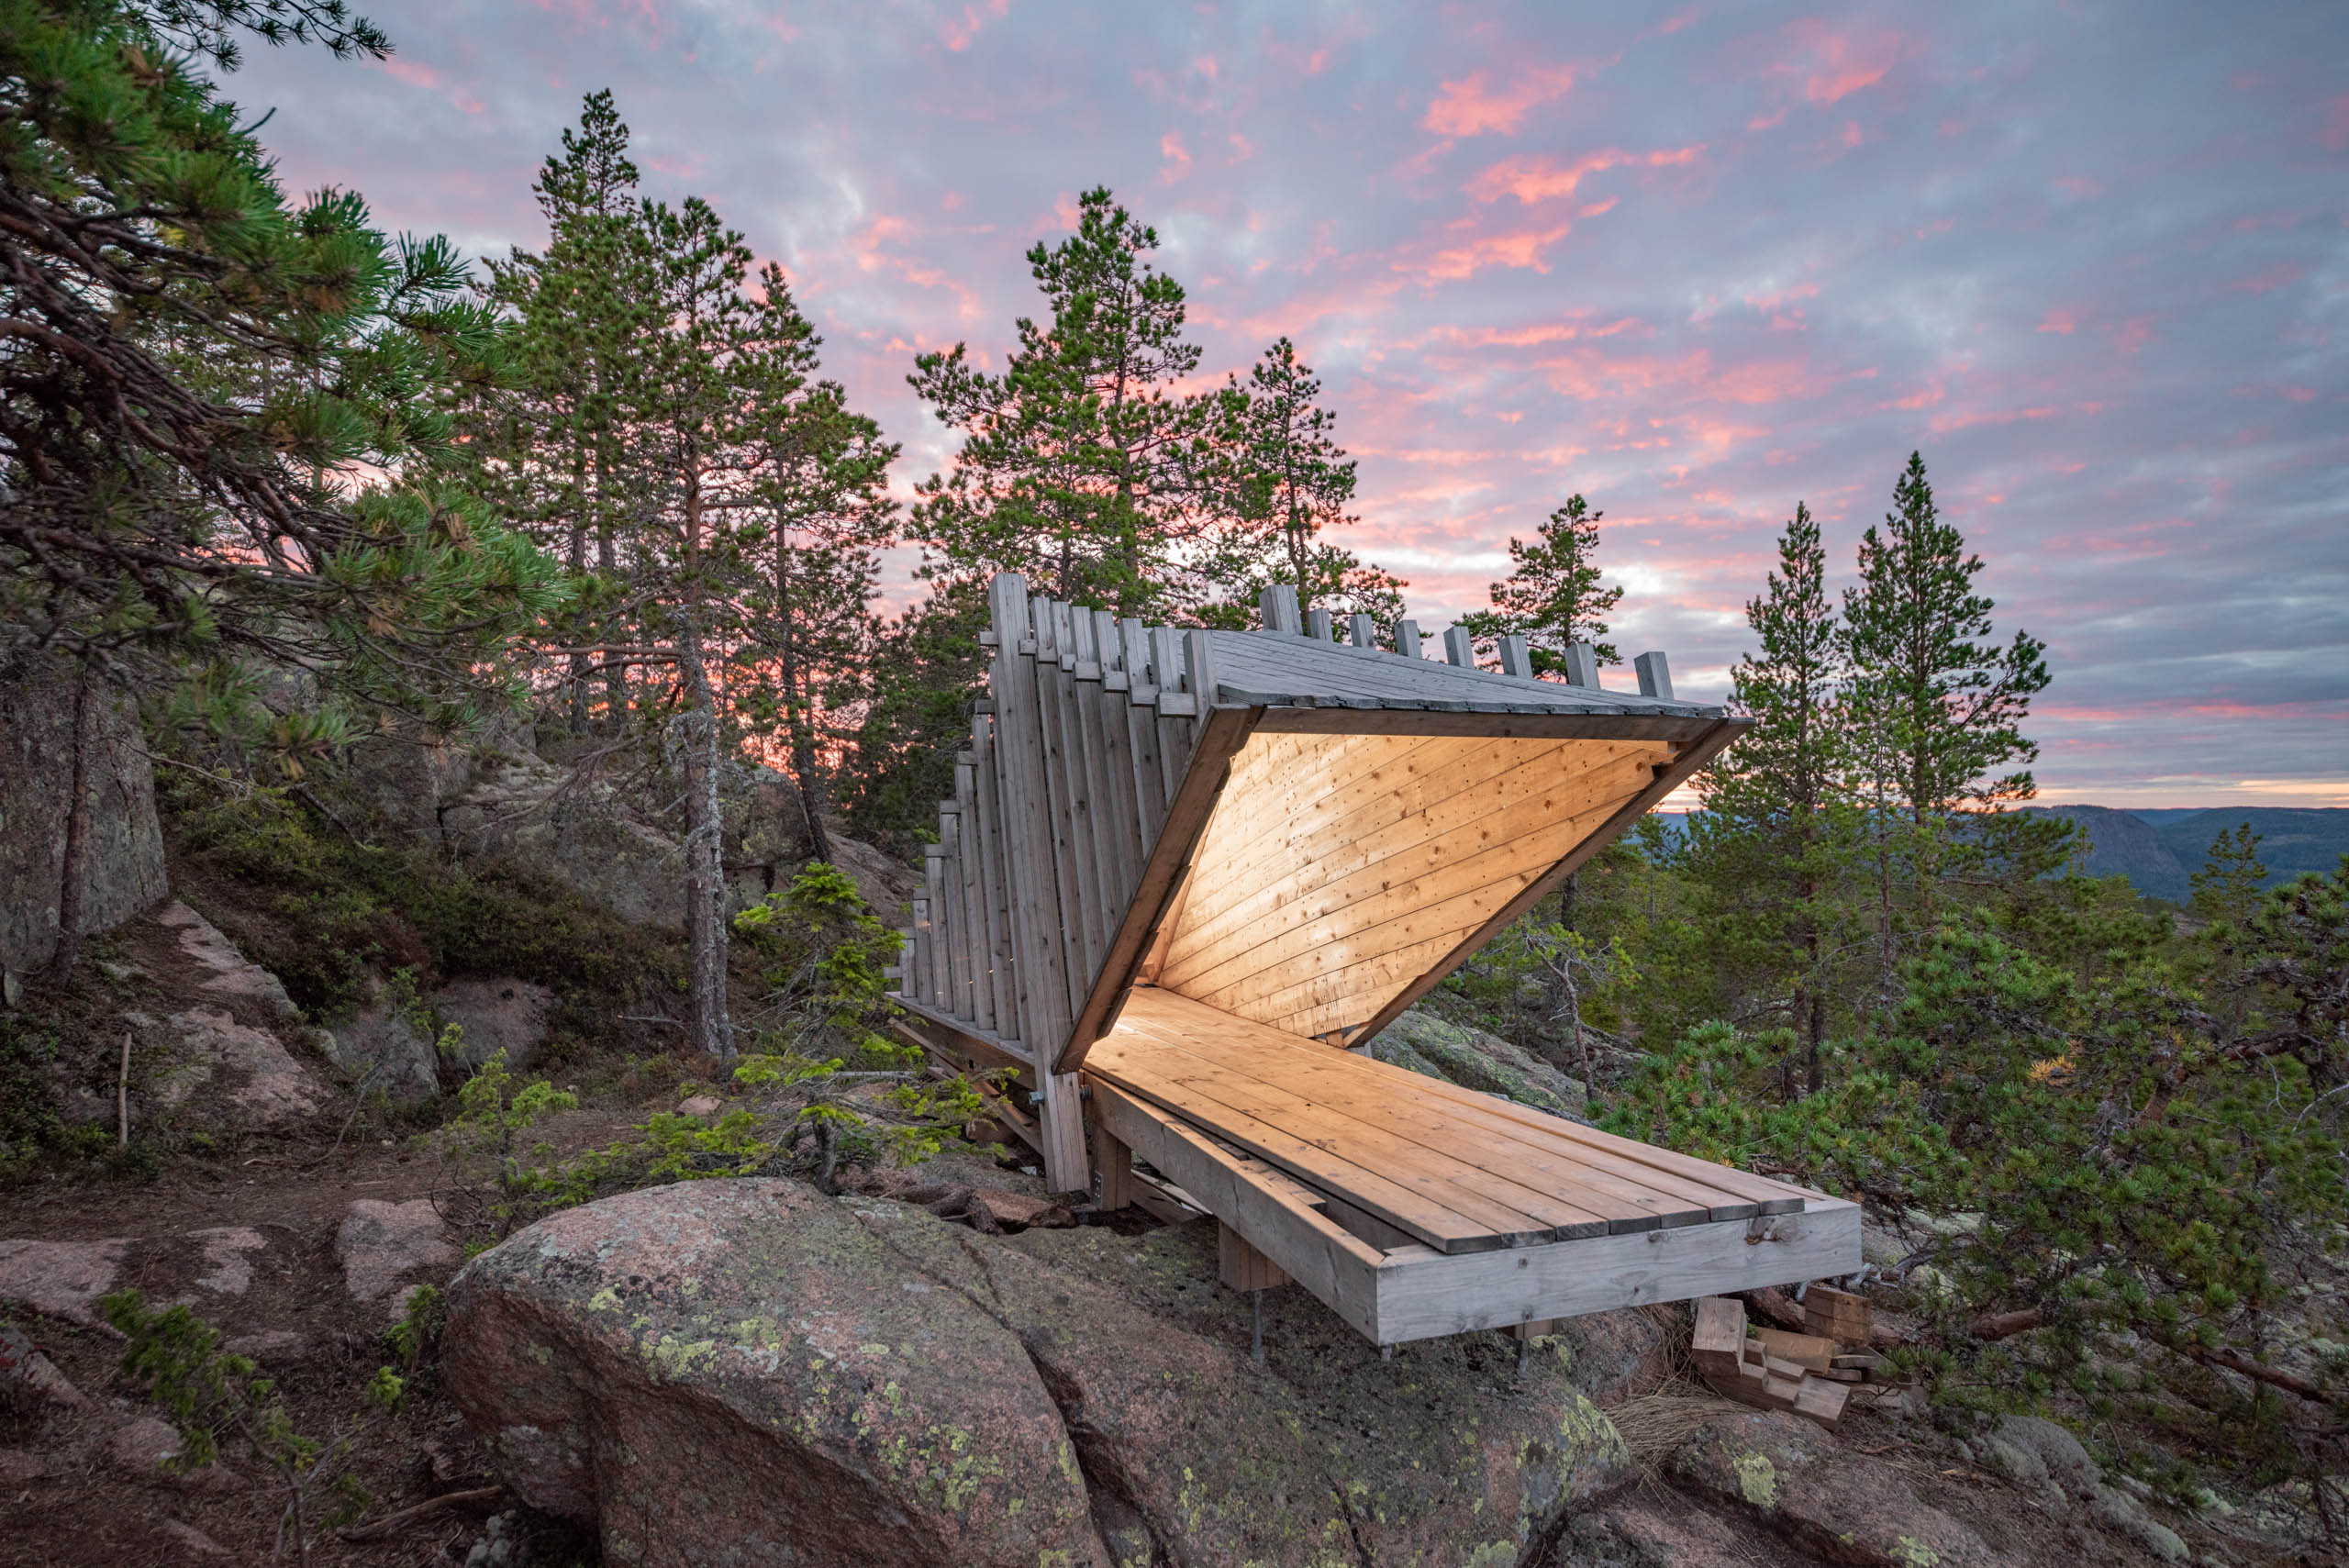 A hut or shack built with minimalistic architecture stands on top of a forested hill of the High Coast of Sweden, with a colorful twilight sky behind it by Martin Edström